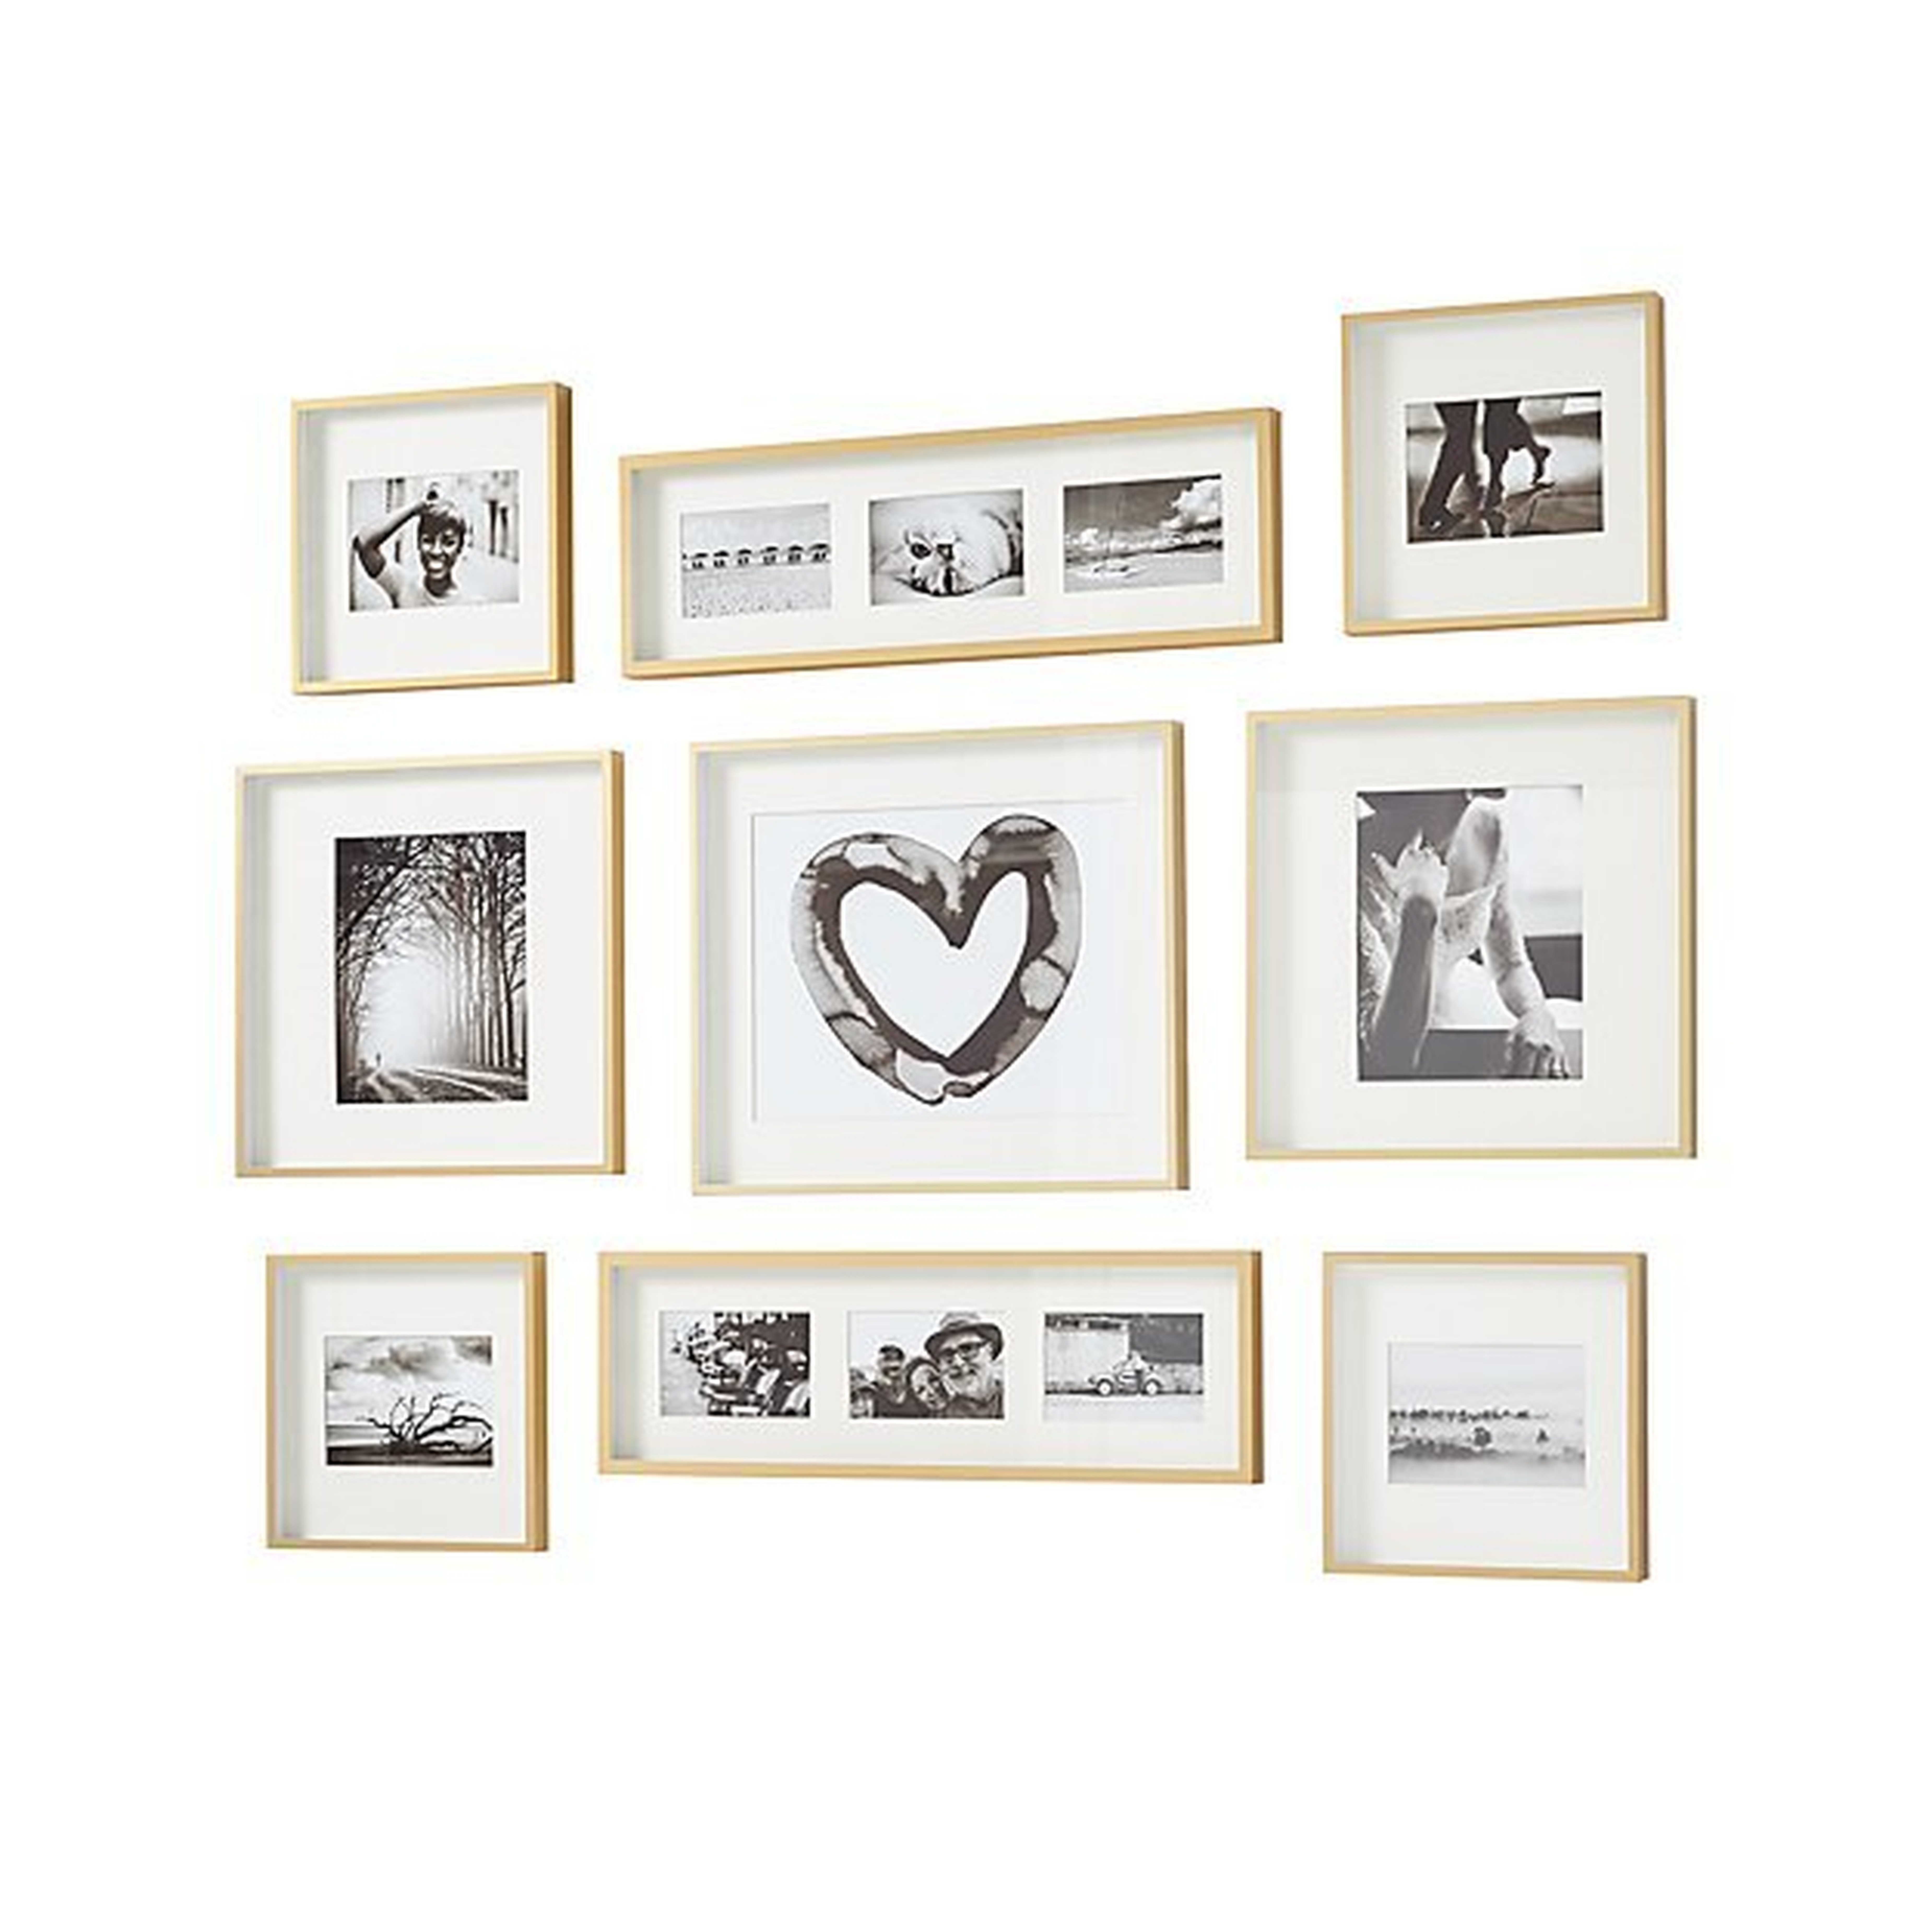 Brushed Brass Picture Frame Gallery, Set of 9 - Crate and Barrel